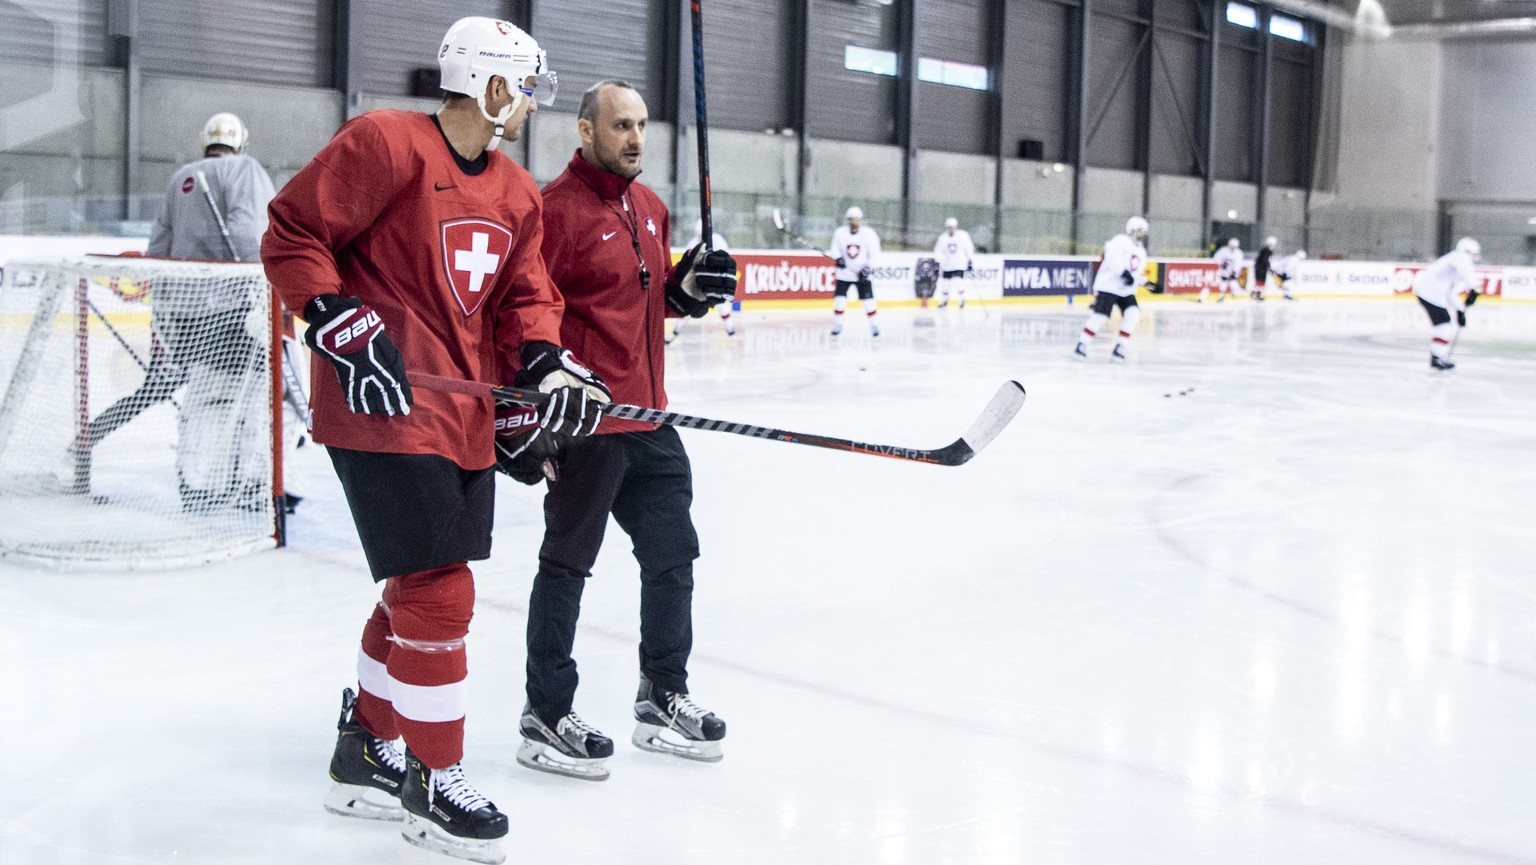 Nino Niederreiter, left, and Christian Wohlwend, during a training session of the Swiss team at the IIHF 2019 World Ice Hockey Championships, at the Ondrej Nepela Arena in Bratislava, Slovakia, on Mon ...